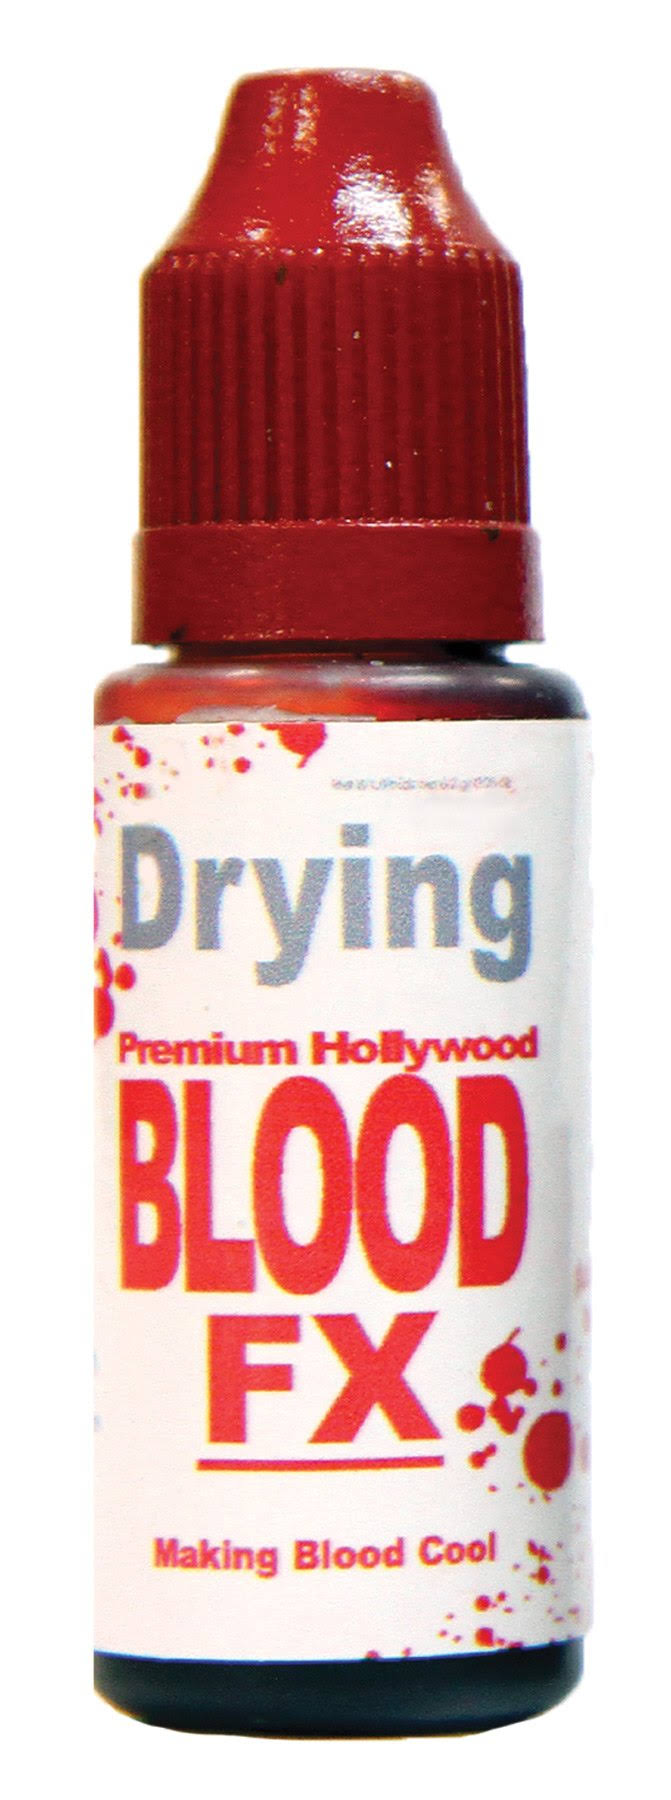 Tinsley Transfers Blood Fx Makeup Adult Accessory